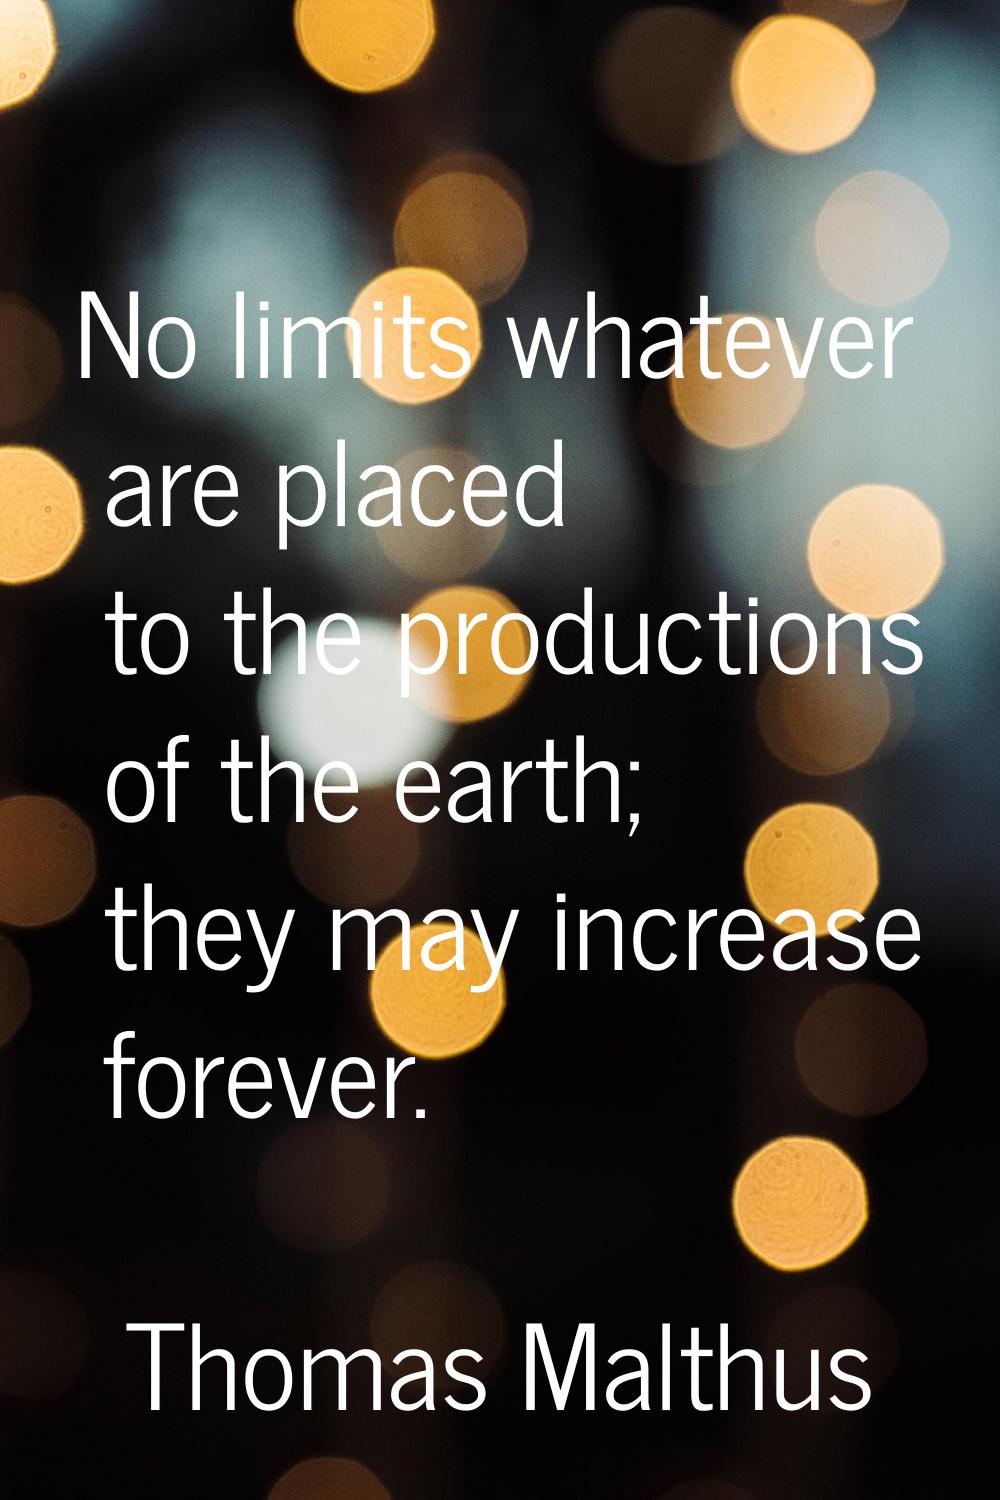 No limits whatever are placed to the productions of the earth; they may increase forever.